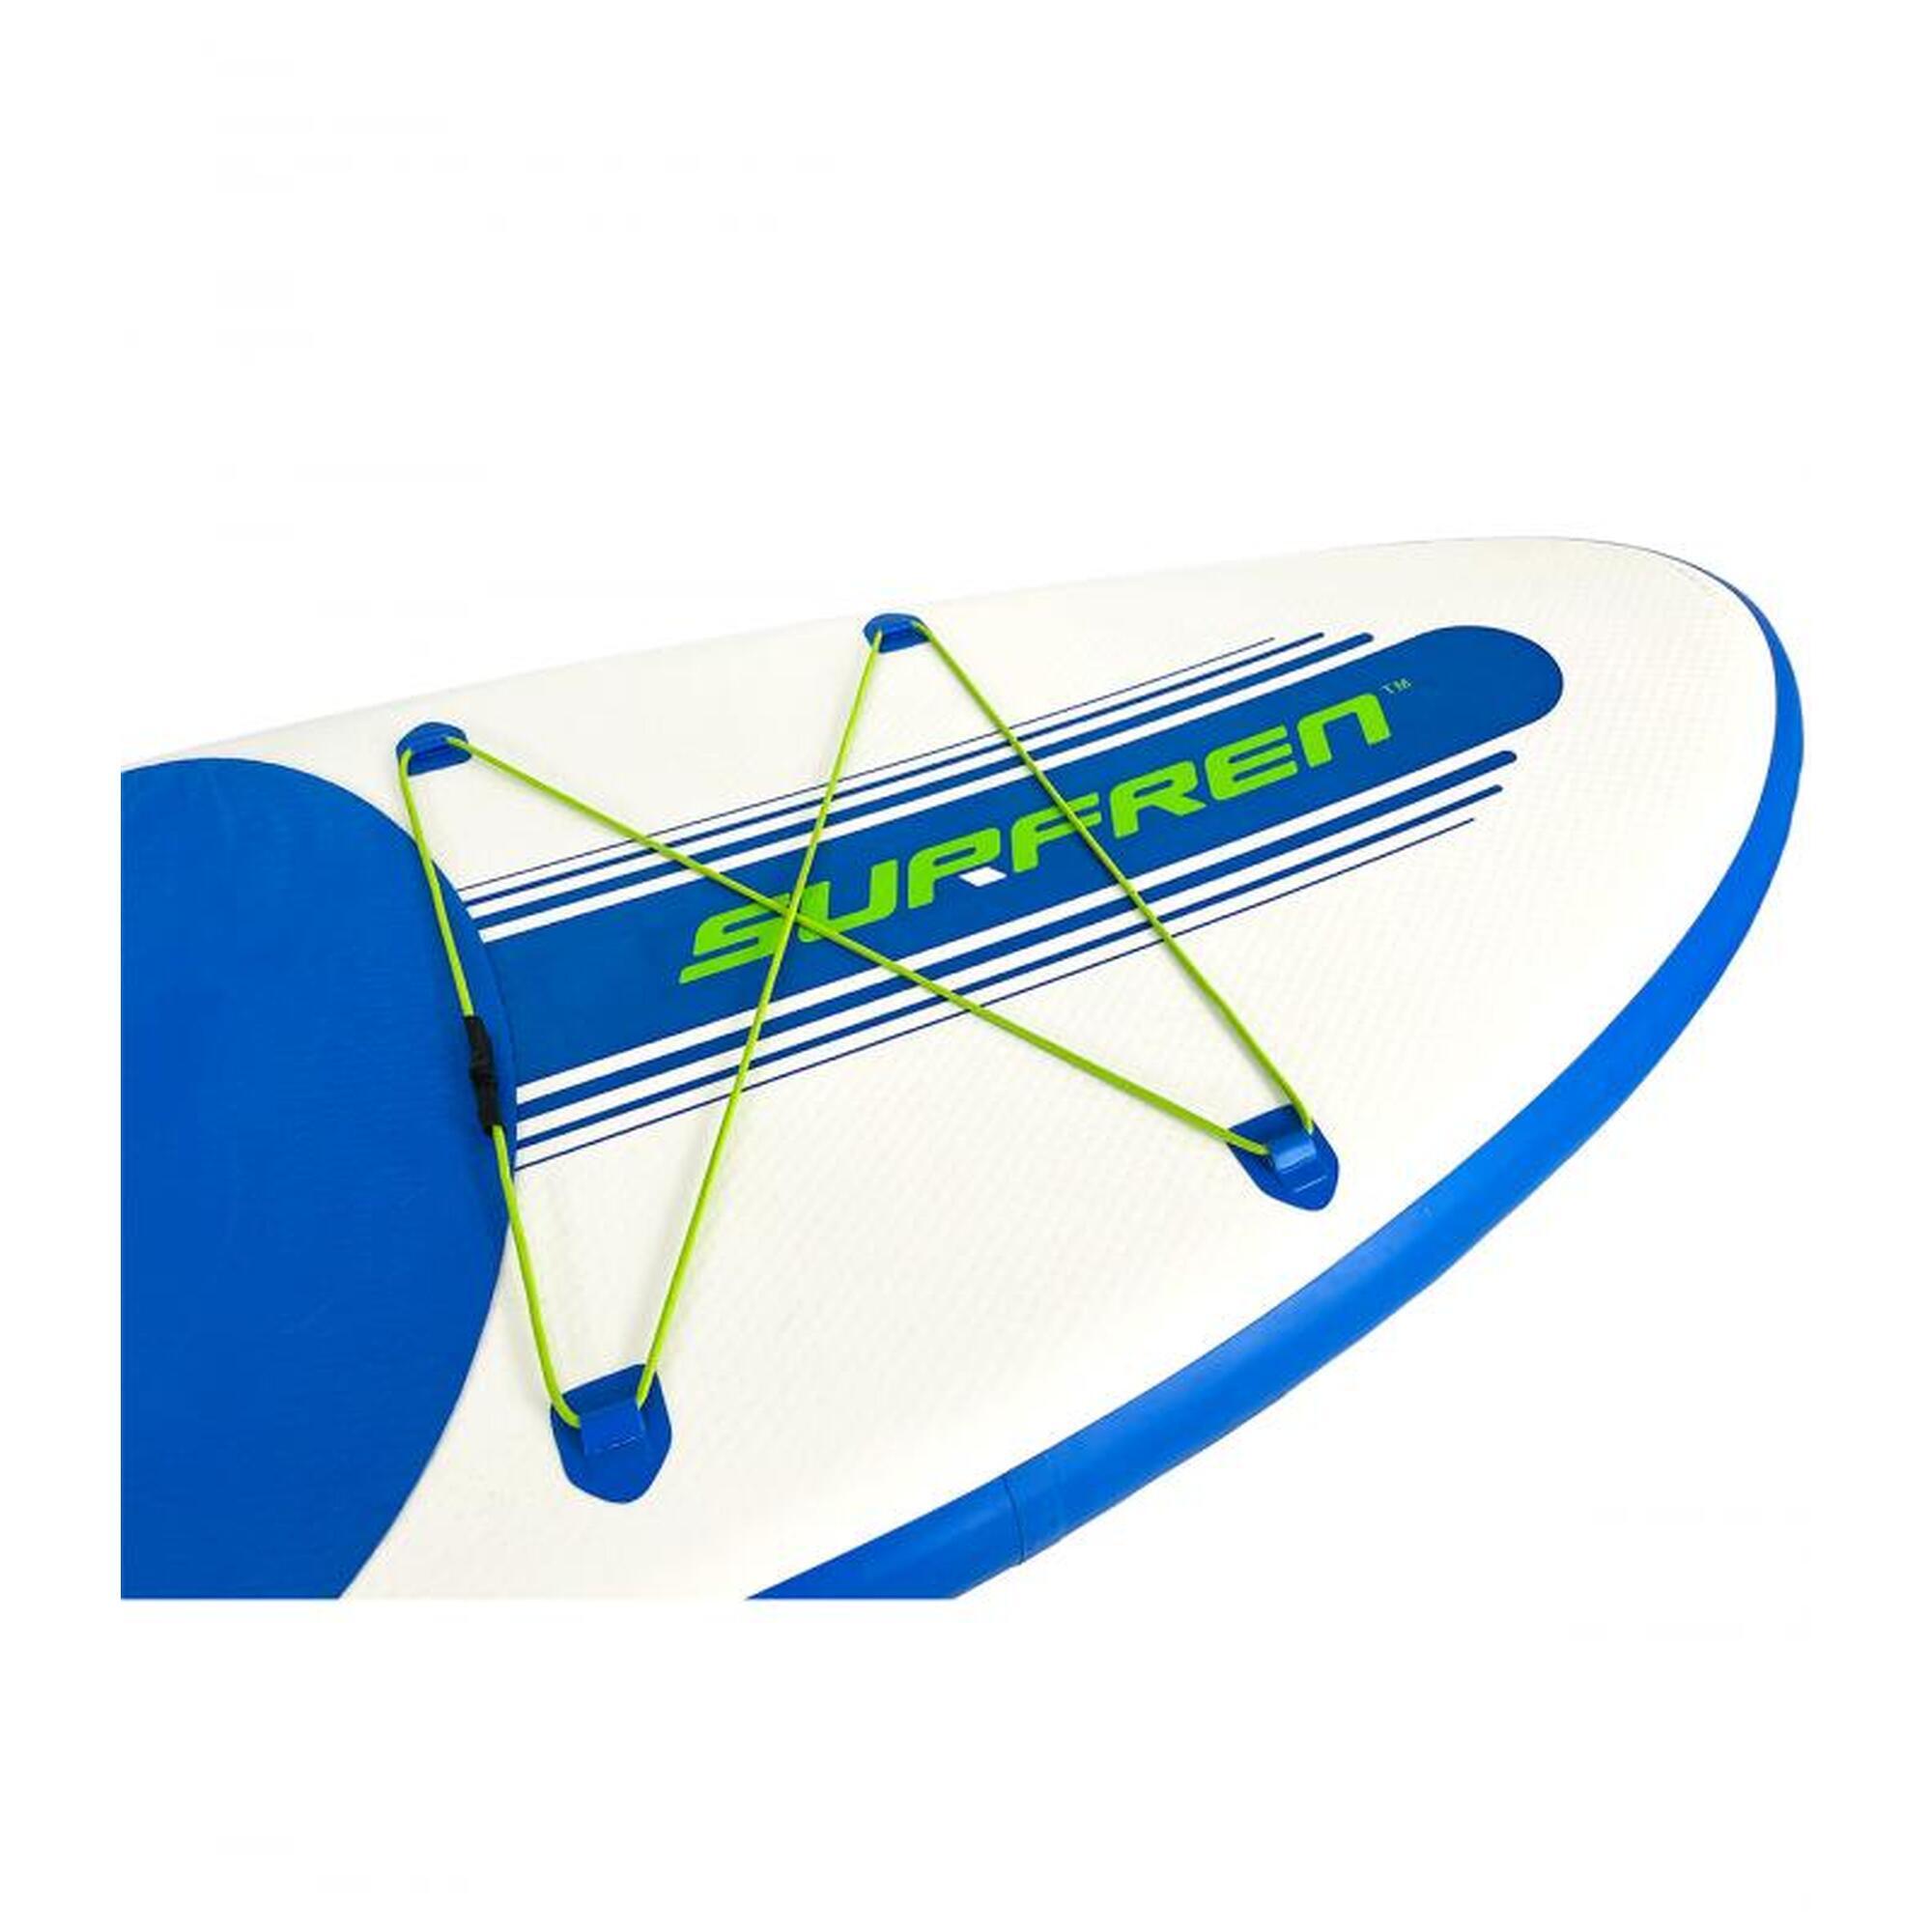 Stand Up Paddle Gonflable - SURFREN S1 10'0" Bleu/Vert